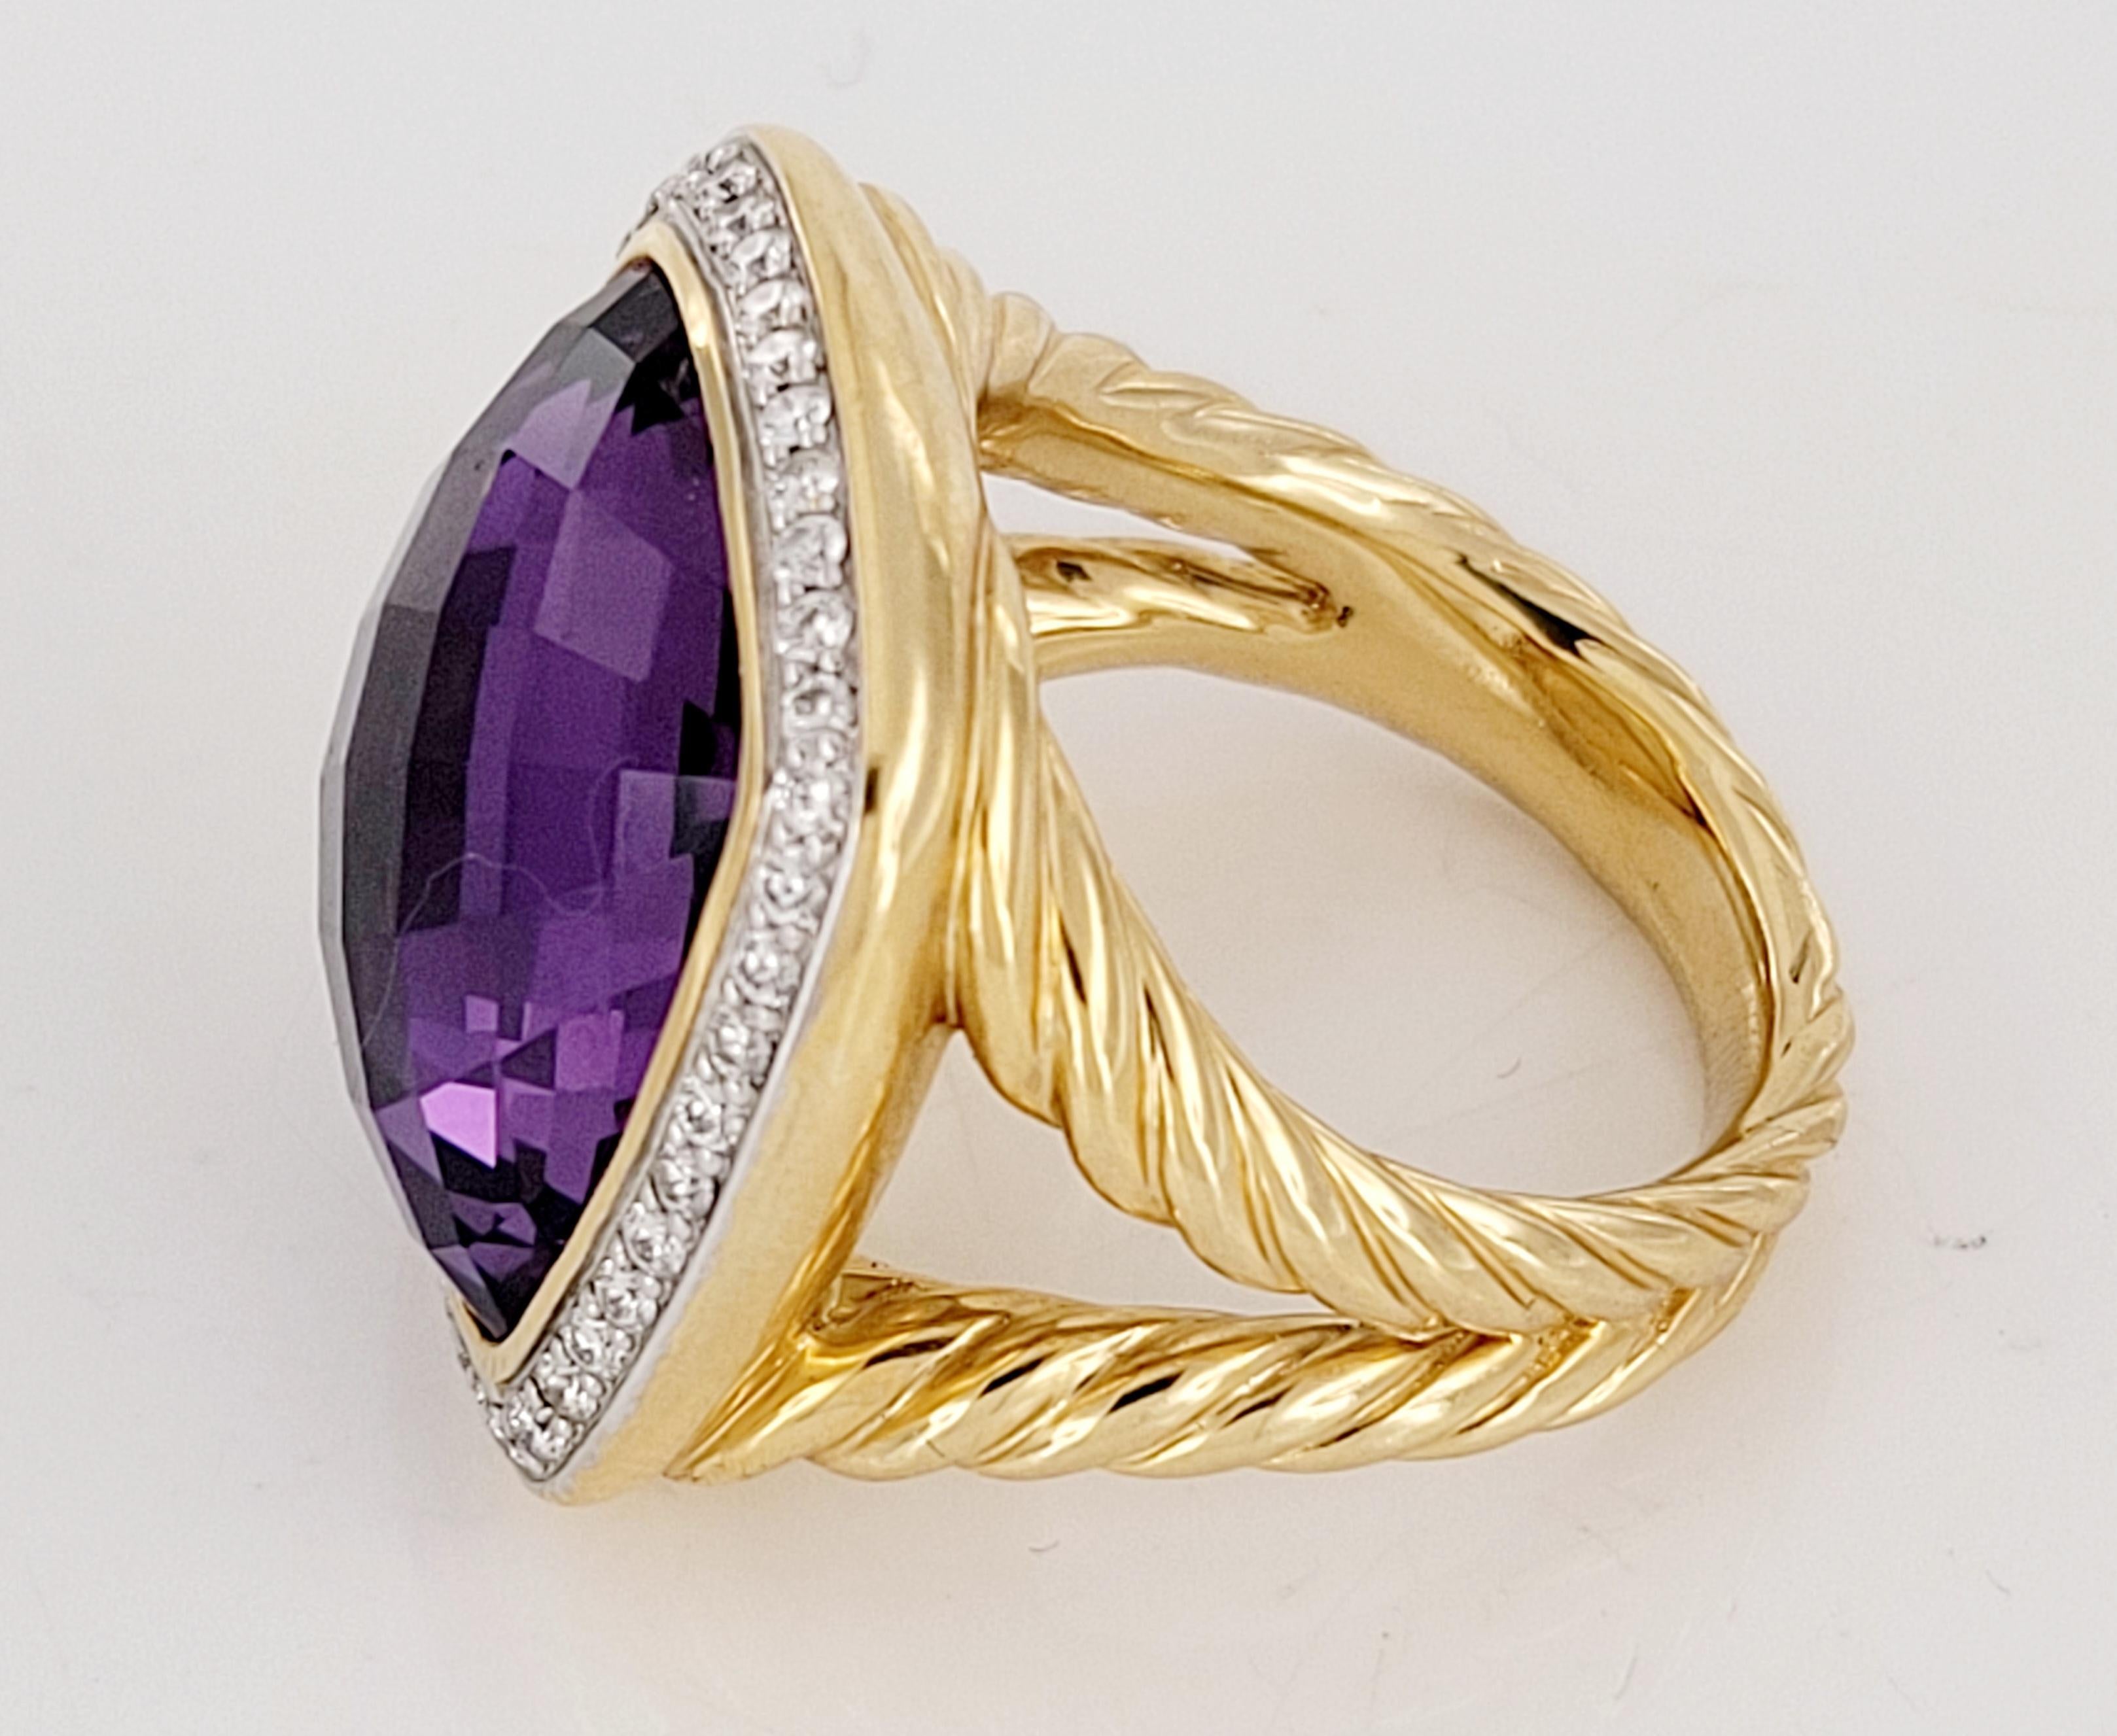 Brand David Yurman  
18-Karat Yellow Gold 
Faceted Amethyst 16.5 X 16.5mm 
Pave Diamonds 0.42ct total carat weight
Ring Wide 21.2X21.6mm 
Ring Size 7.25

New without Tags ( Never worn) 
David Yurman ring box included
Retail Price $6150